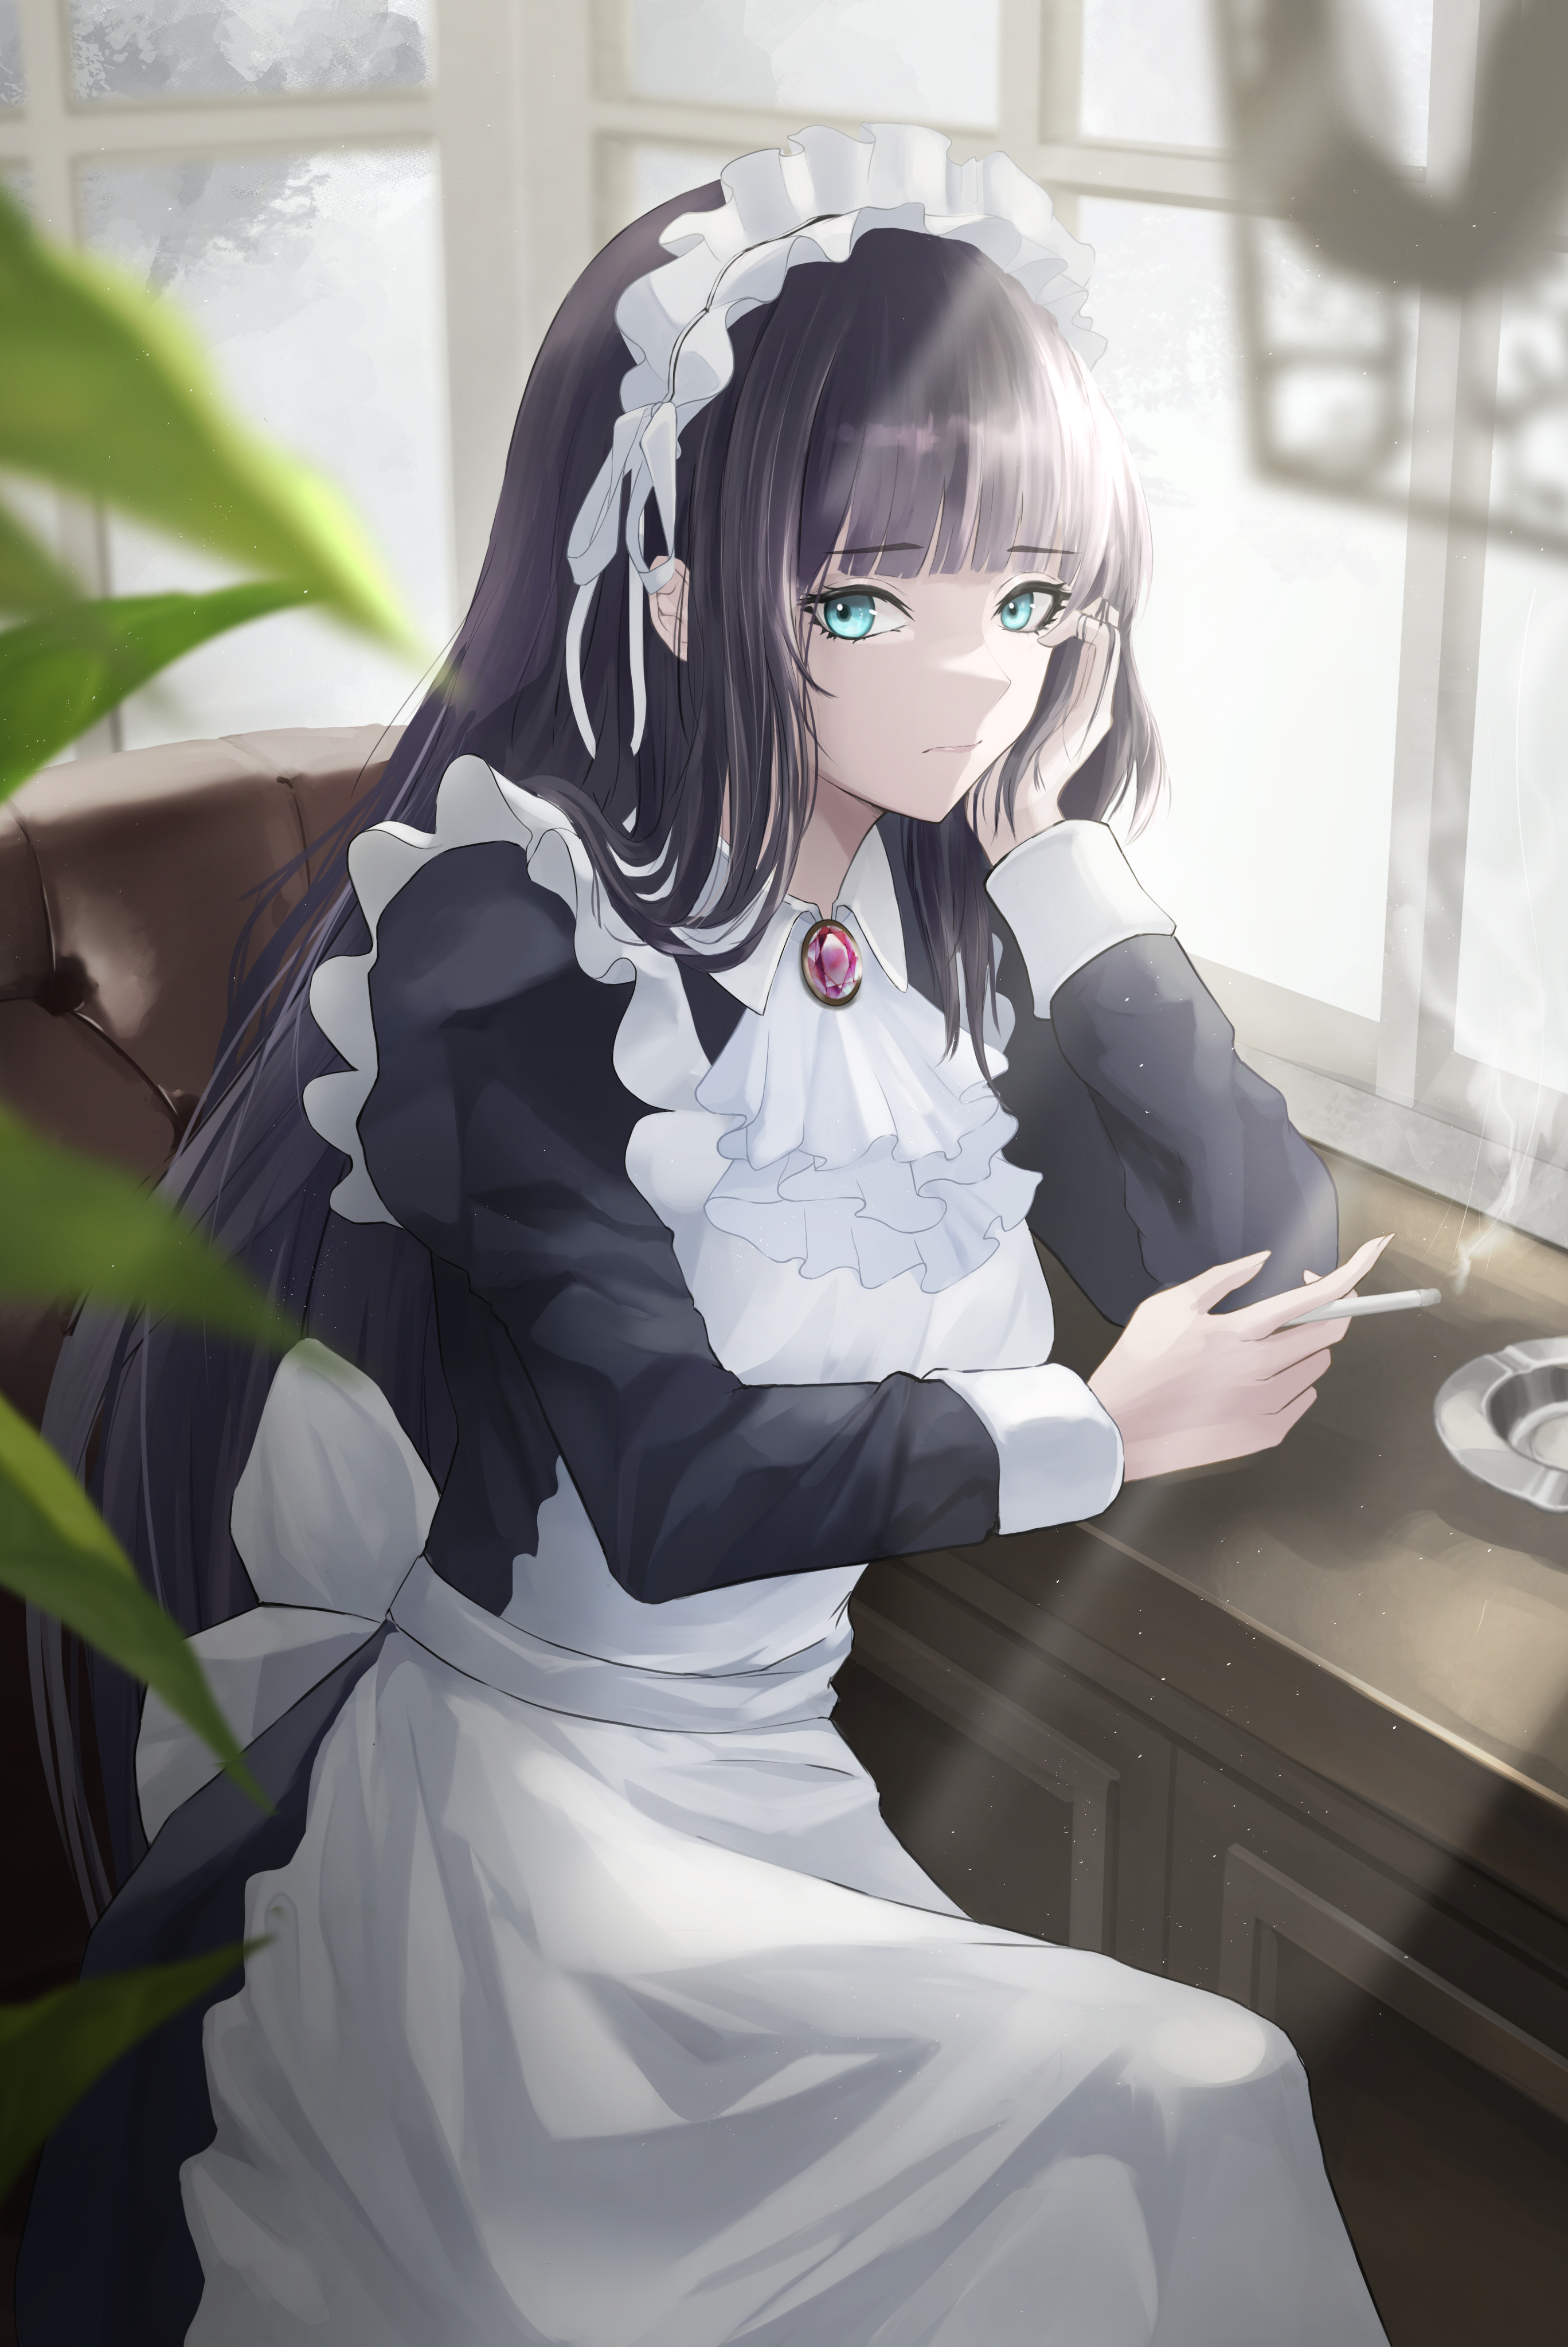 HD wallpaper purple haired girl anime character maid costume cat grace   Wallpaper Flare